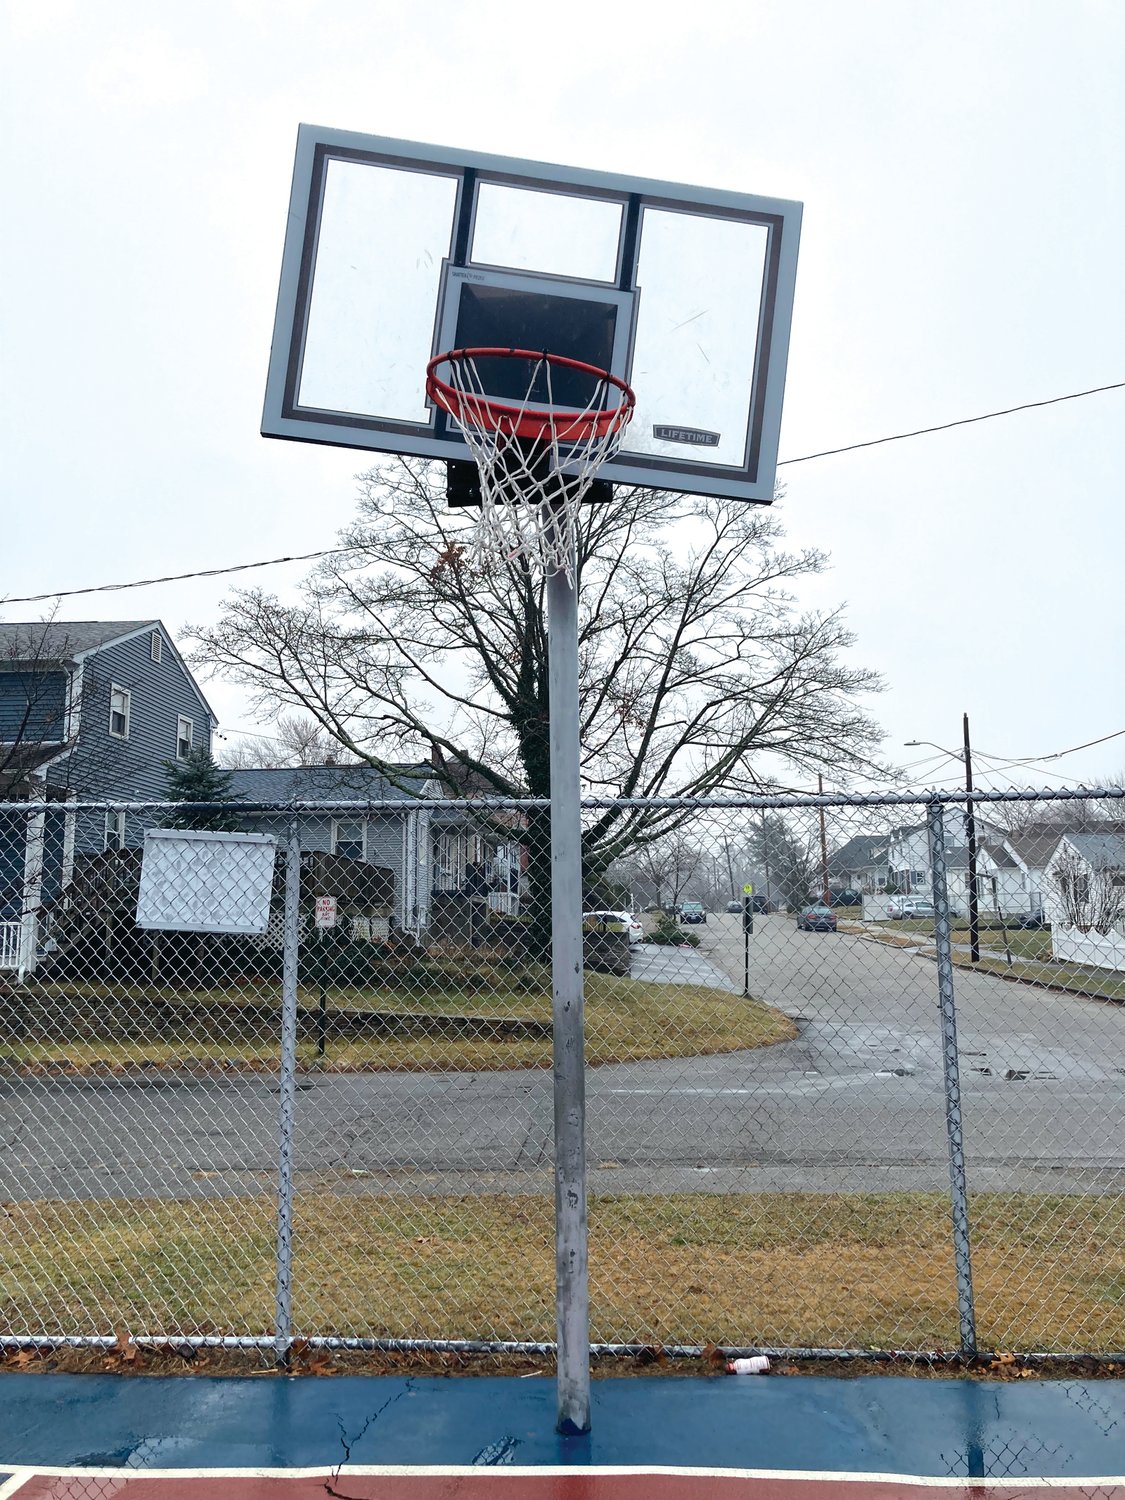 NEW HOOPS NEEDED: The basketball hoops at Carberry Field will soon be replaced with new hoops that have been backordered since August – they arrived late last week.